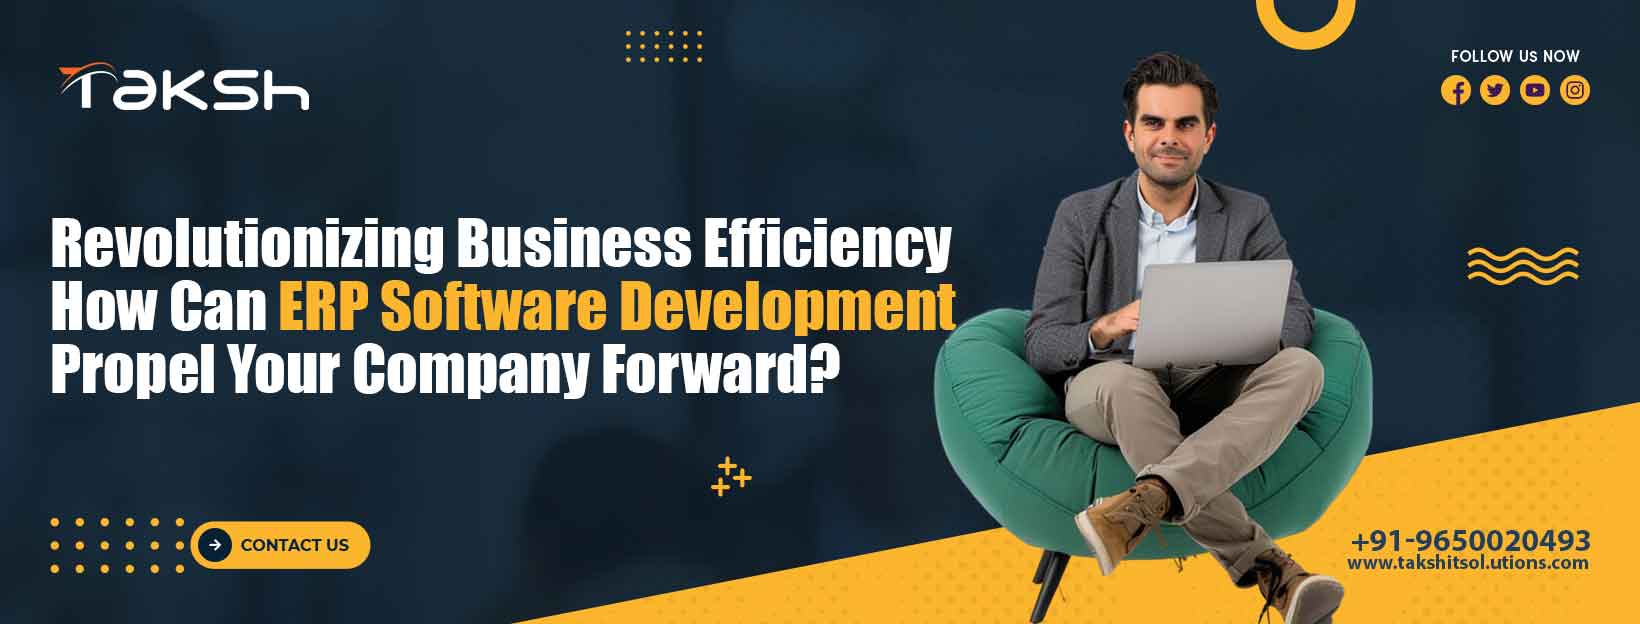 Revolutionizing Business Efficiency: How Can ERP Software Development Propel Your Company Forward?